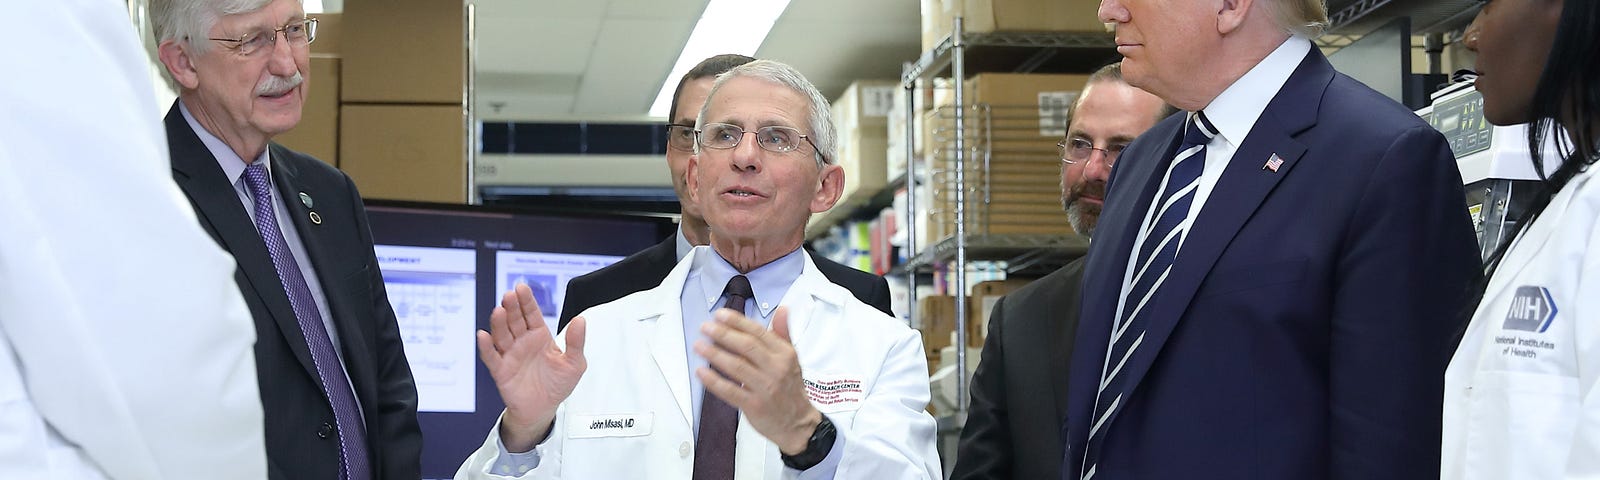 Dr. Anthony Fauci, center, with President Trump on April 8, 2020. Credit: National Institutes of Health